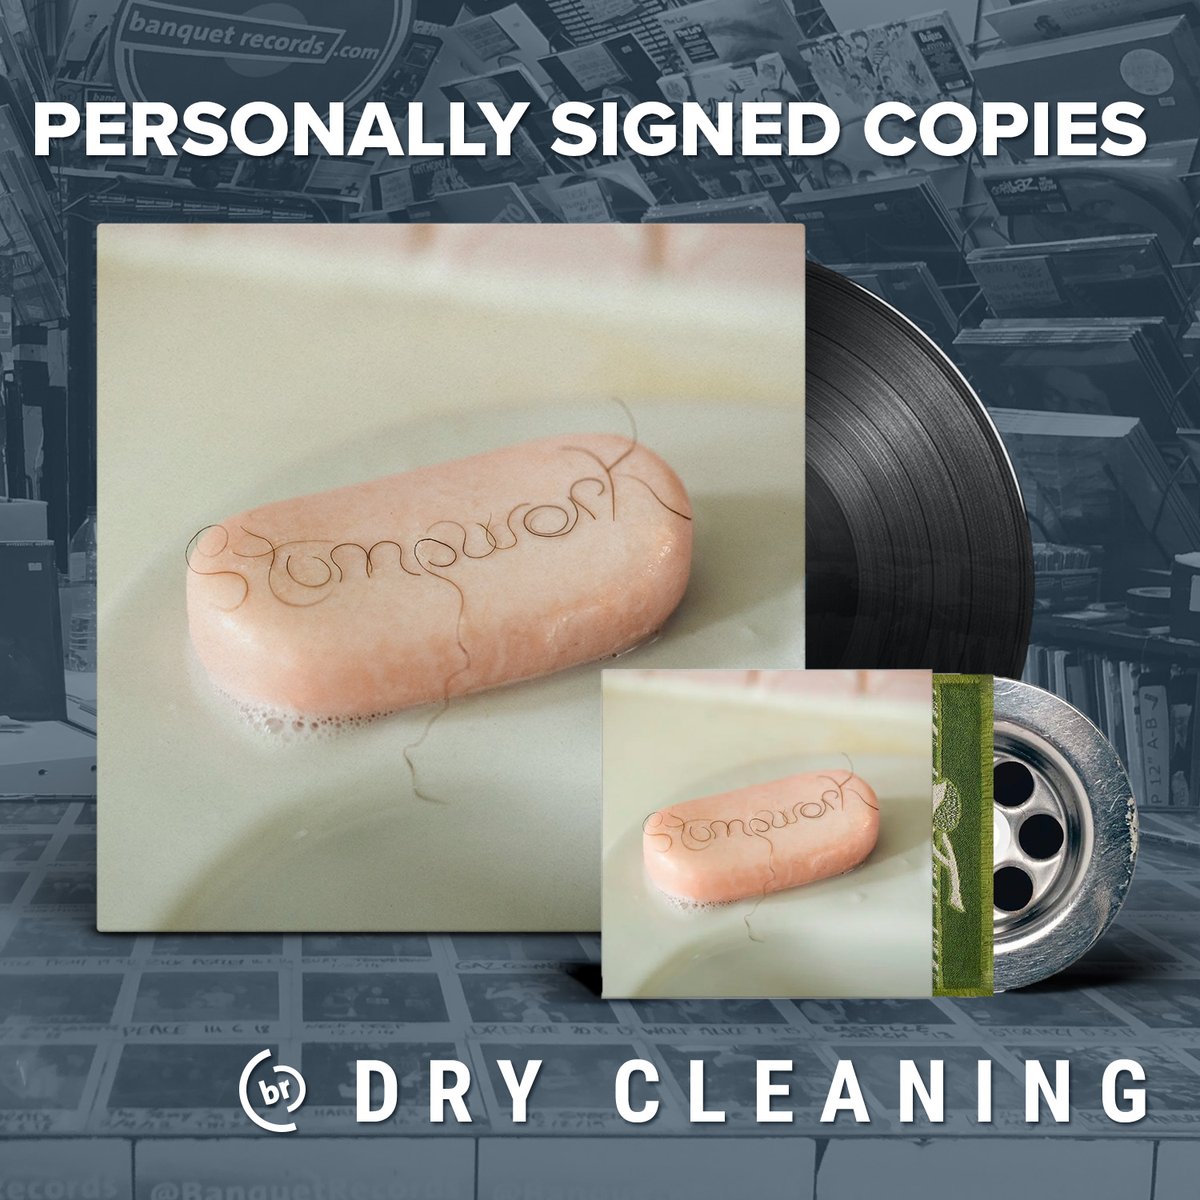 ✍️ DRY CLEANING - SIGNED ✍️ fancy picking up a personally signed copy of the new album 'Stumpwork'? head on over to banquetrecords.com/dry-cleaning/s…